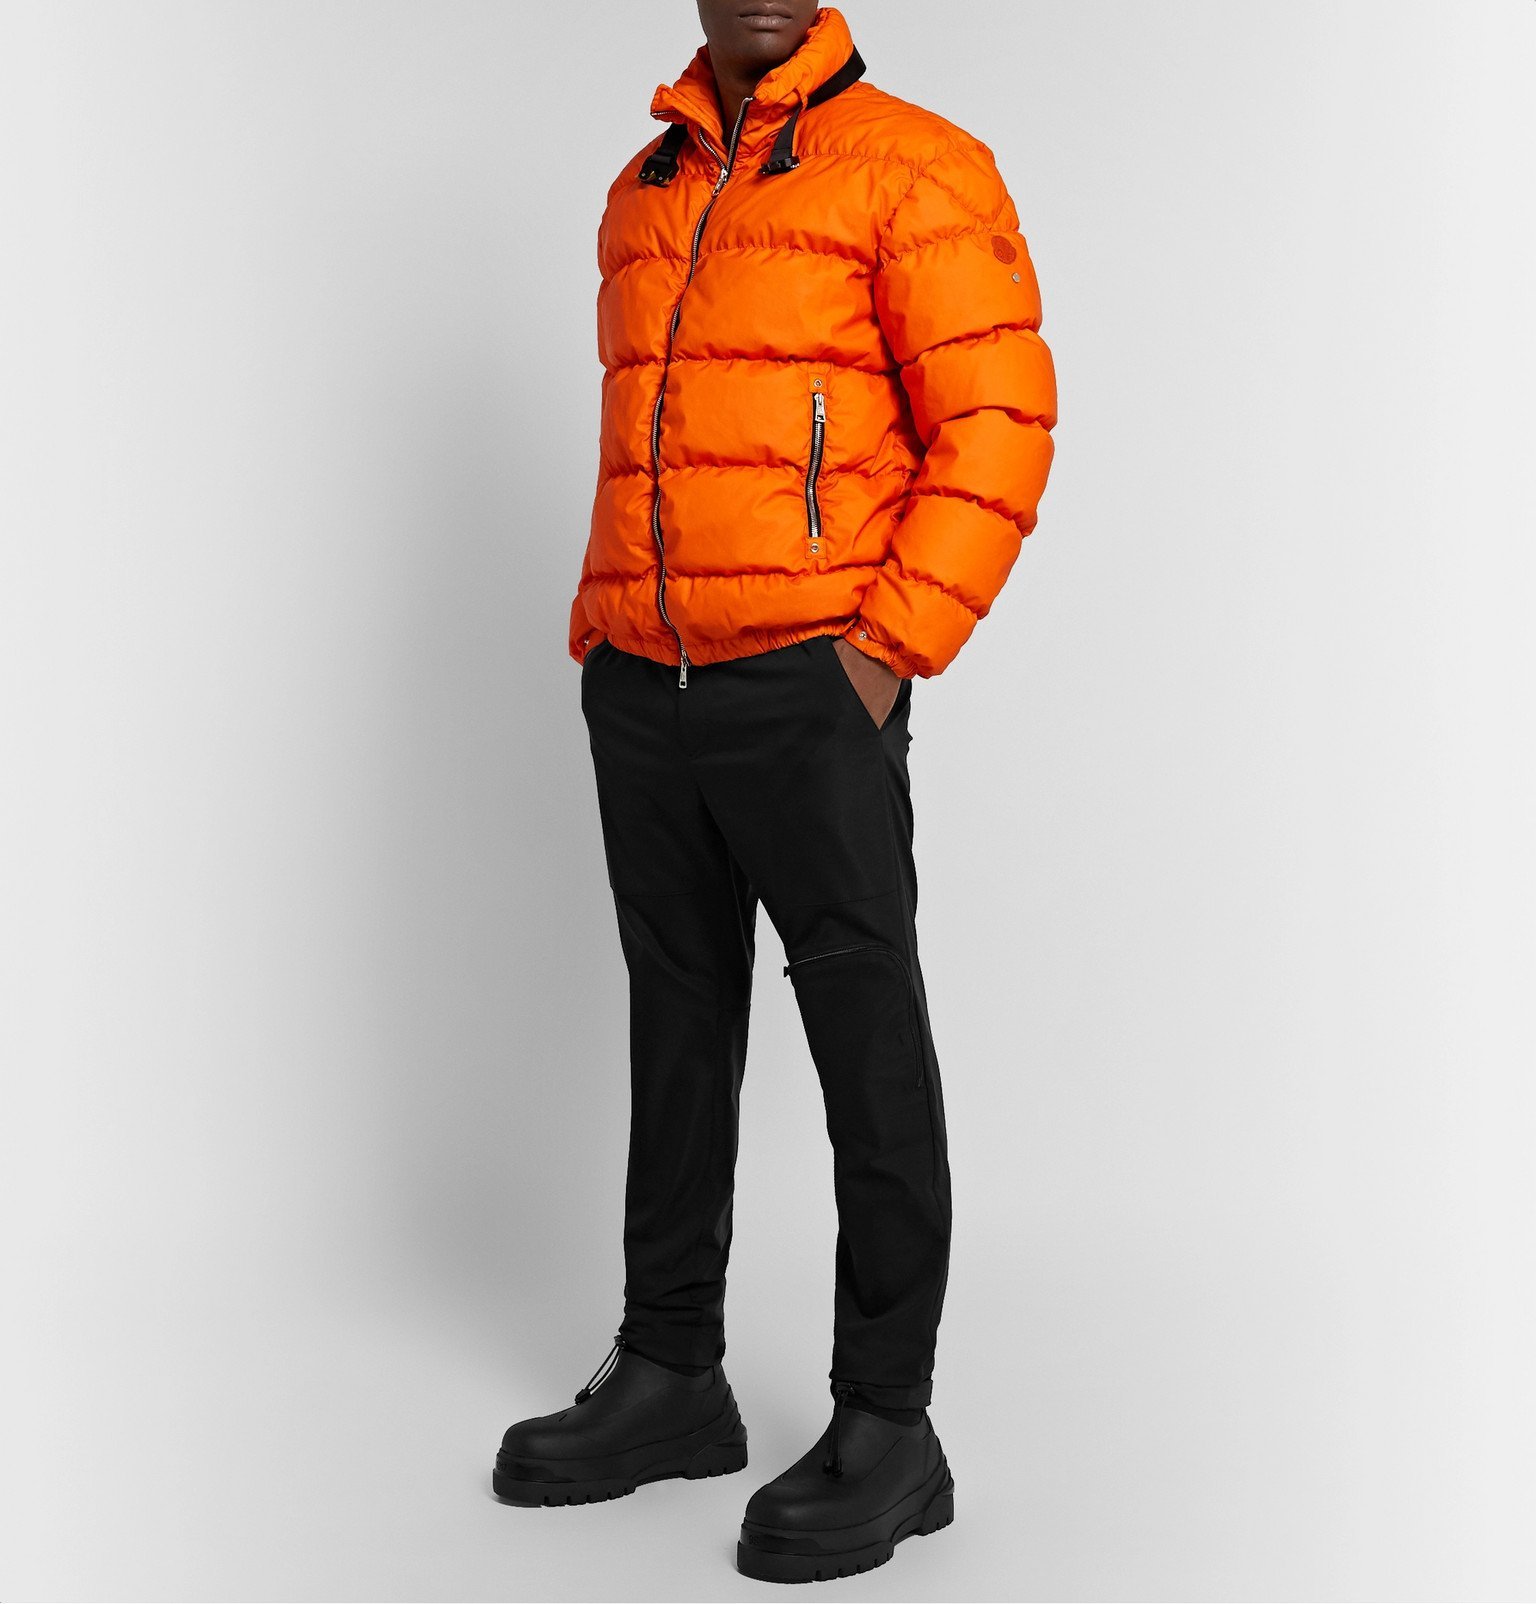 Moncler Genius - 6 Moncler 1017 ALYX 9SM Leather-Trimmed Rubber and ...